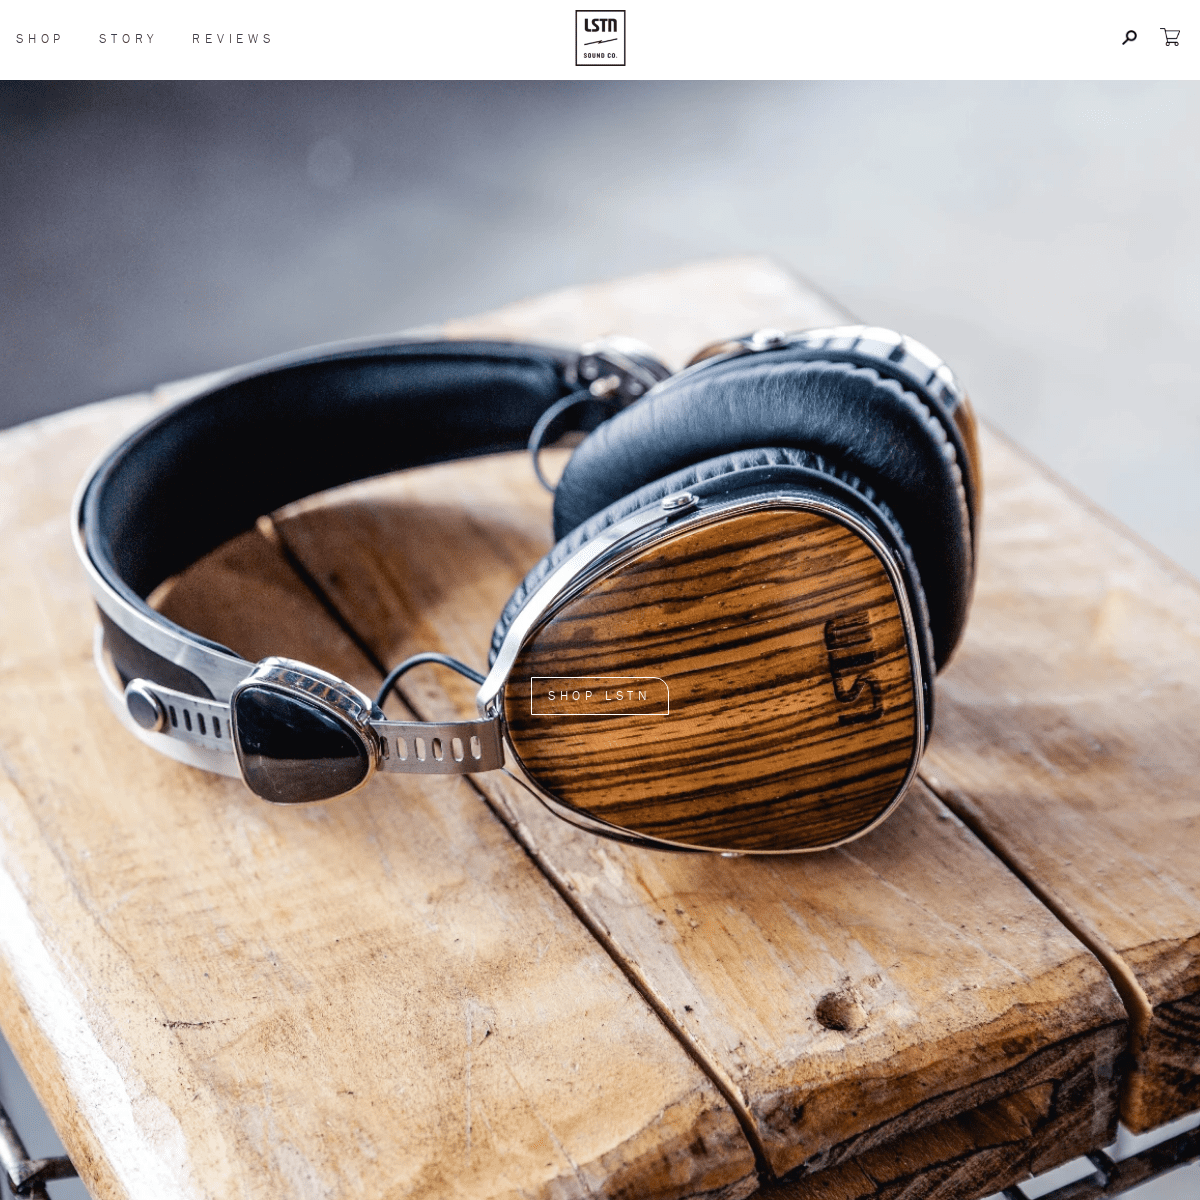 LSTN Sound Co -- Wooden Headphones, Speakers, and Earbuds with Purpose â€“ LSTN Sound Co.